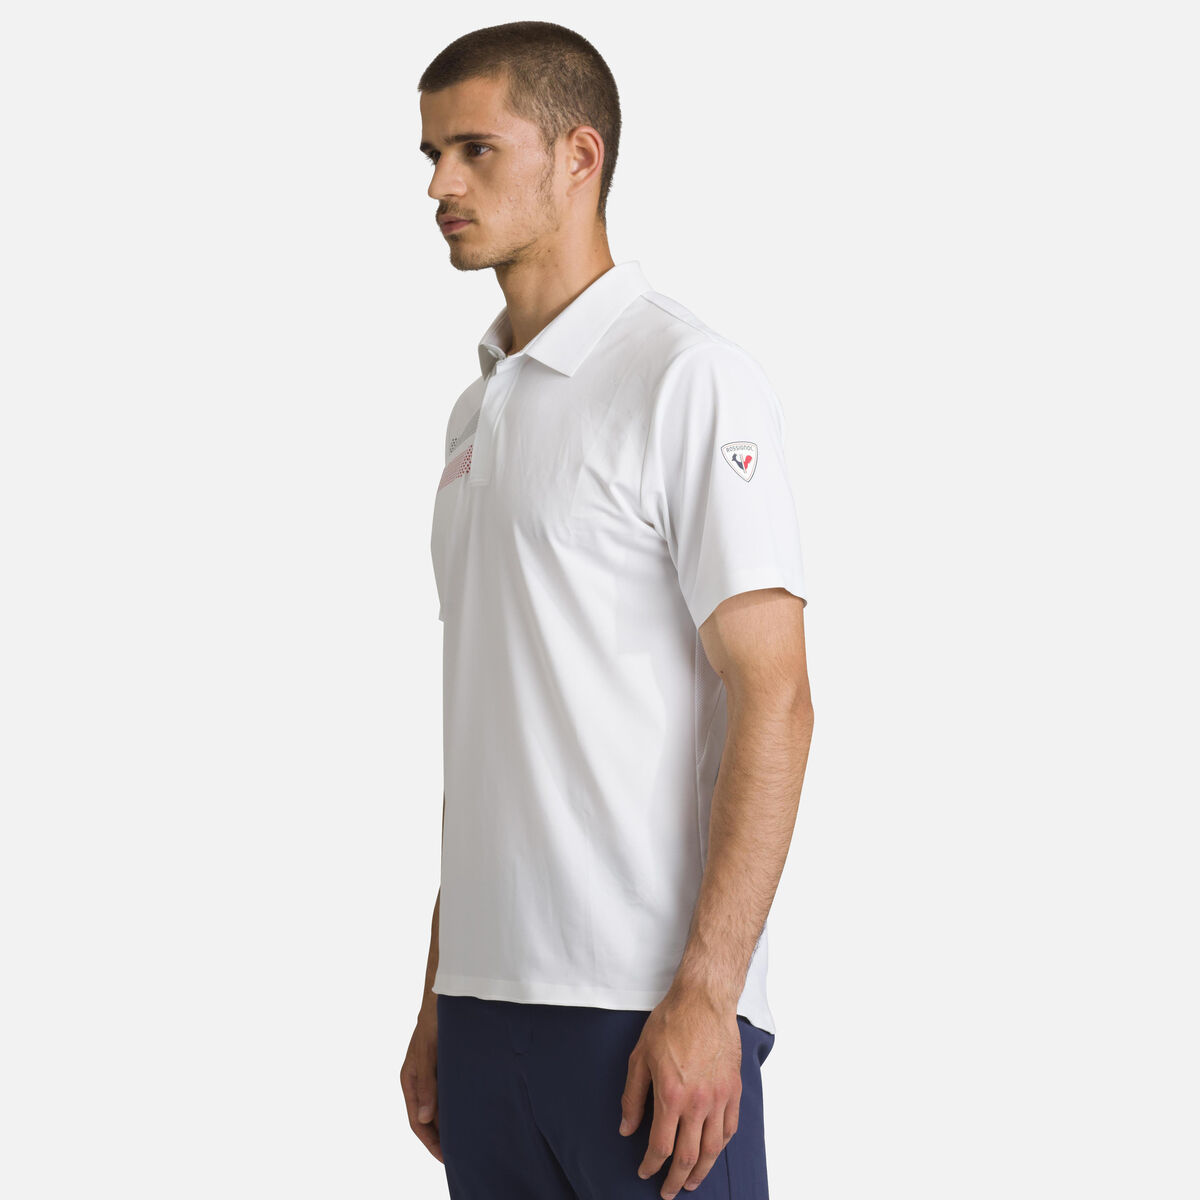 Rossignol Men's lightweight breathable polo shirt White